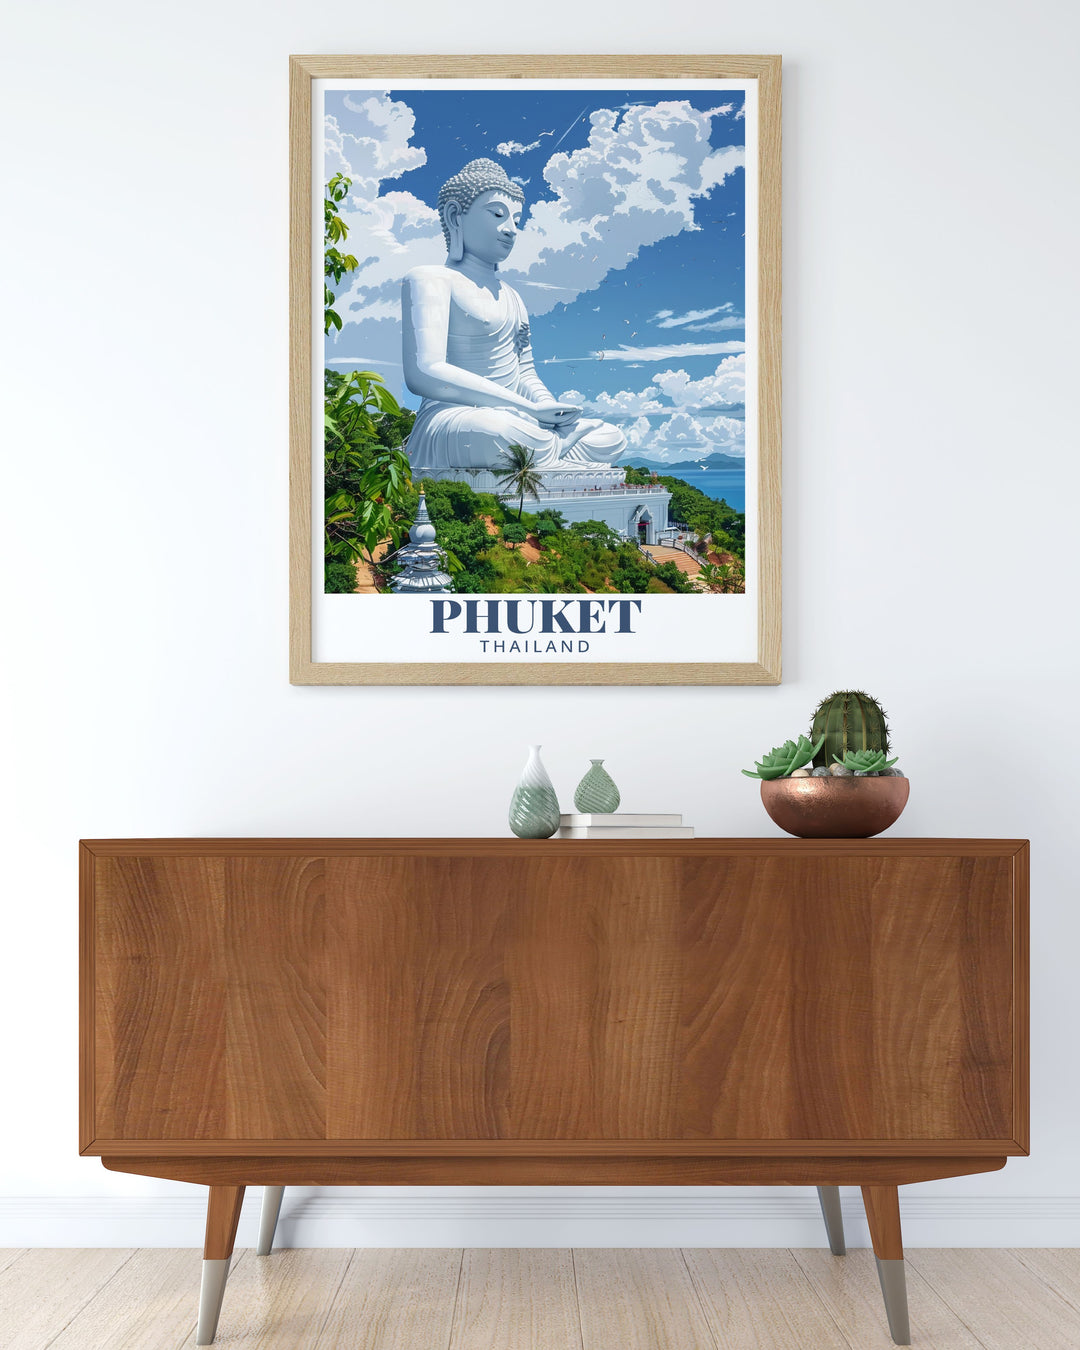 Big Buddha modern art print showcasing the majestic statue in vivid detail perfect for decorating your home with a piece of Thailands rich cultural heritage and inspiring your travel dreams